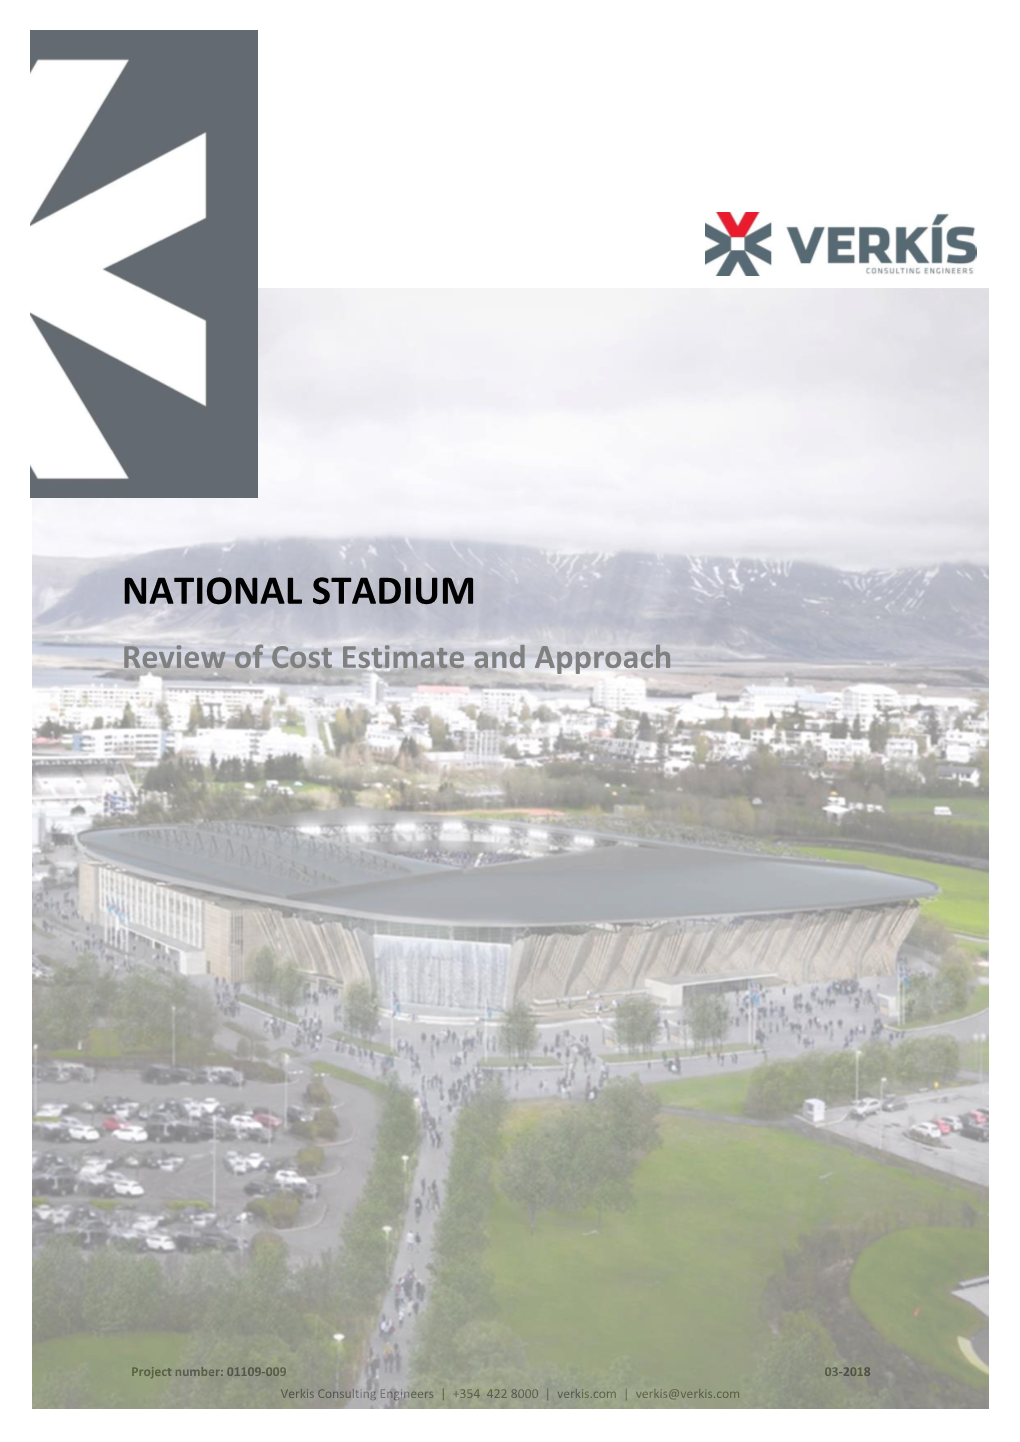 NATIONAL STADIUM Review of Cost Estimate and Approach